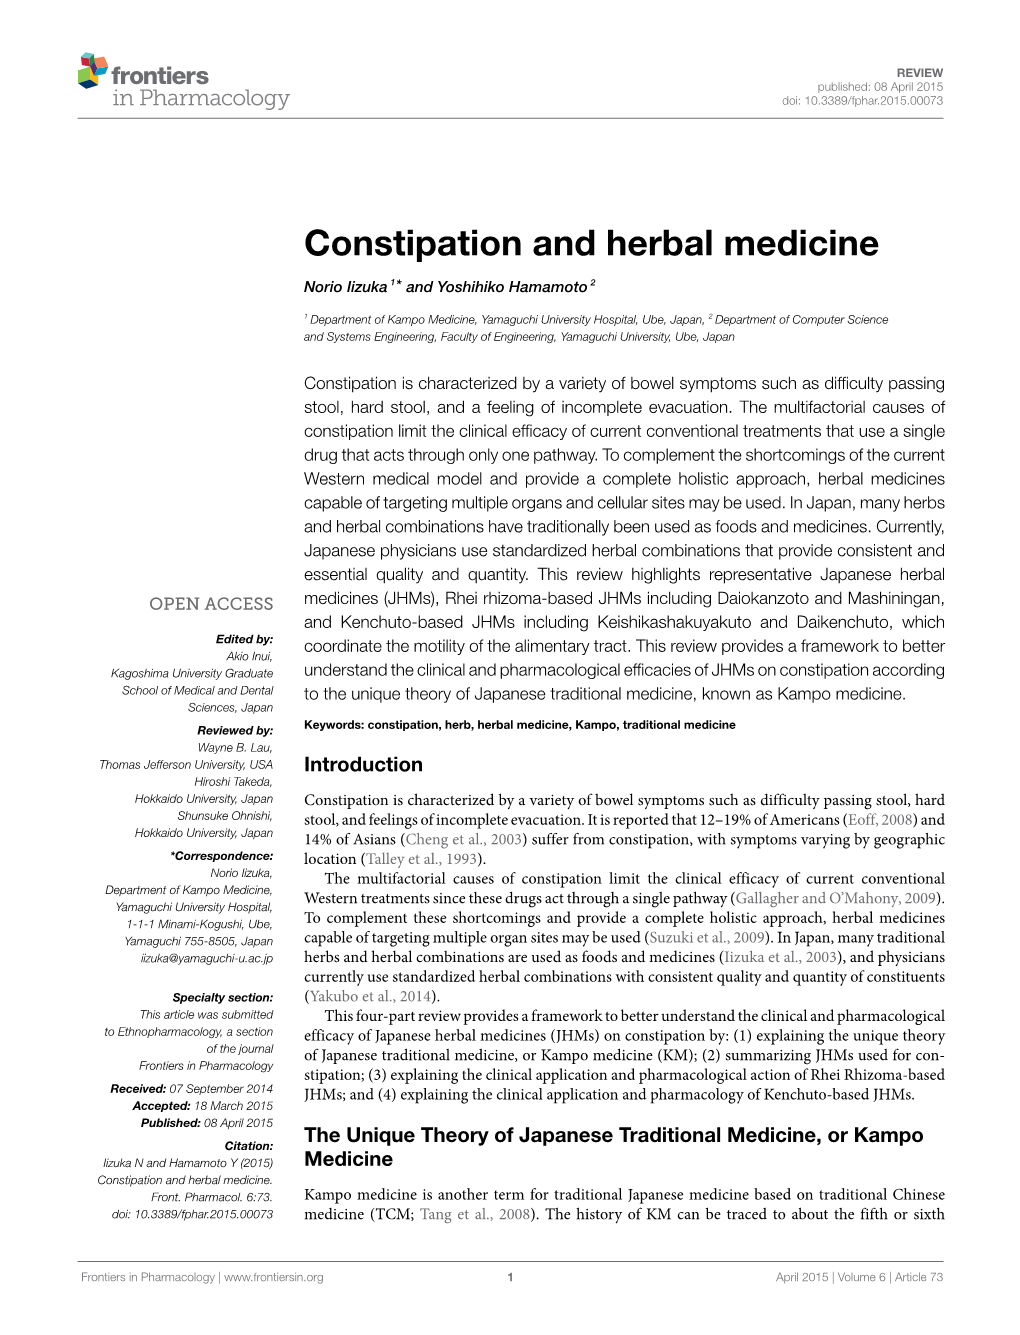 Constipation and Herbal Medicine